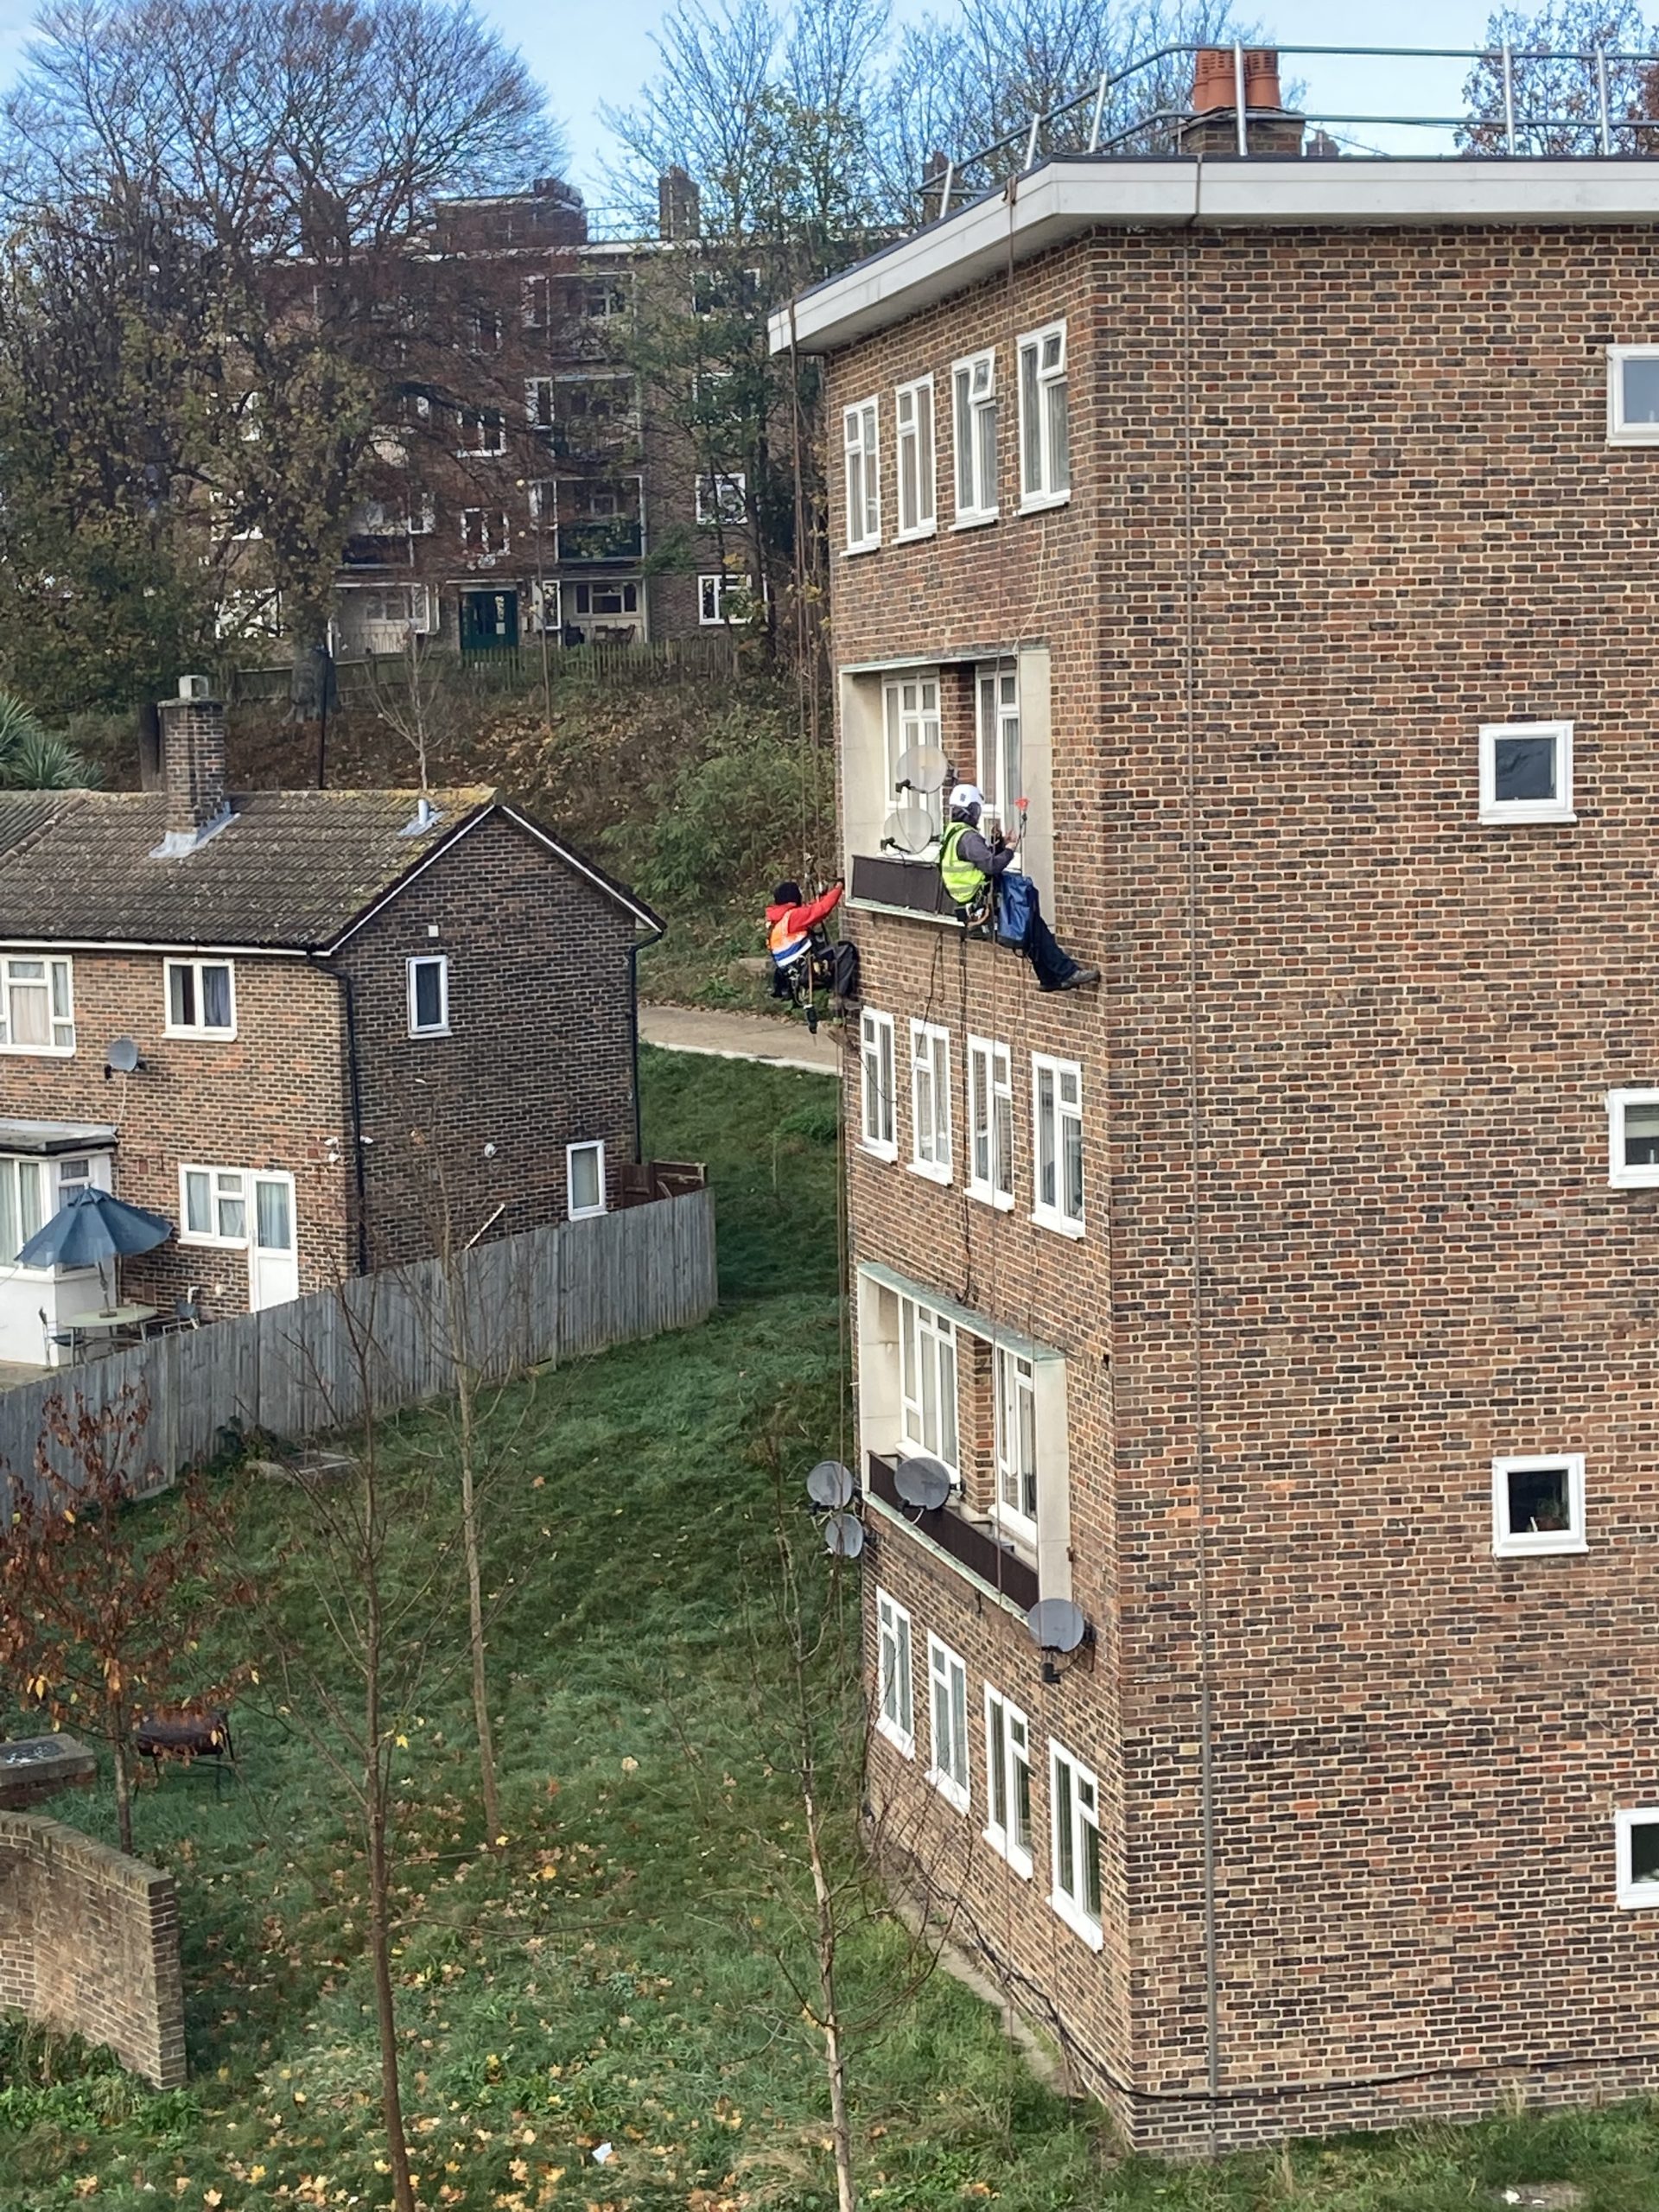 Community Fibre teams instaling fibre cables by abseiling down the side of a building